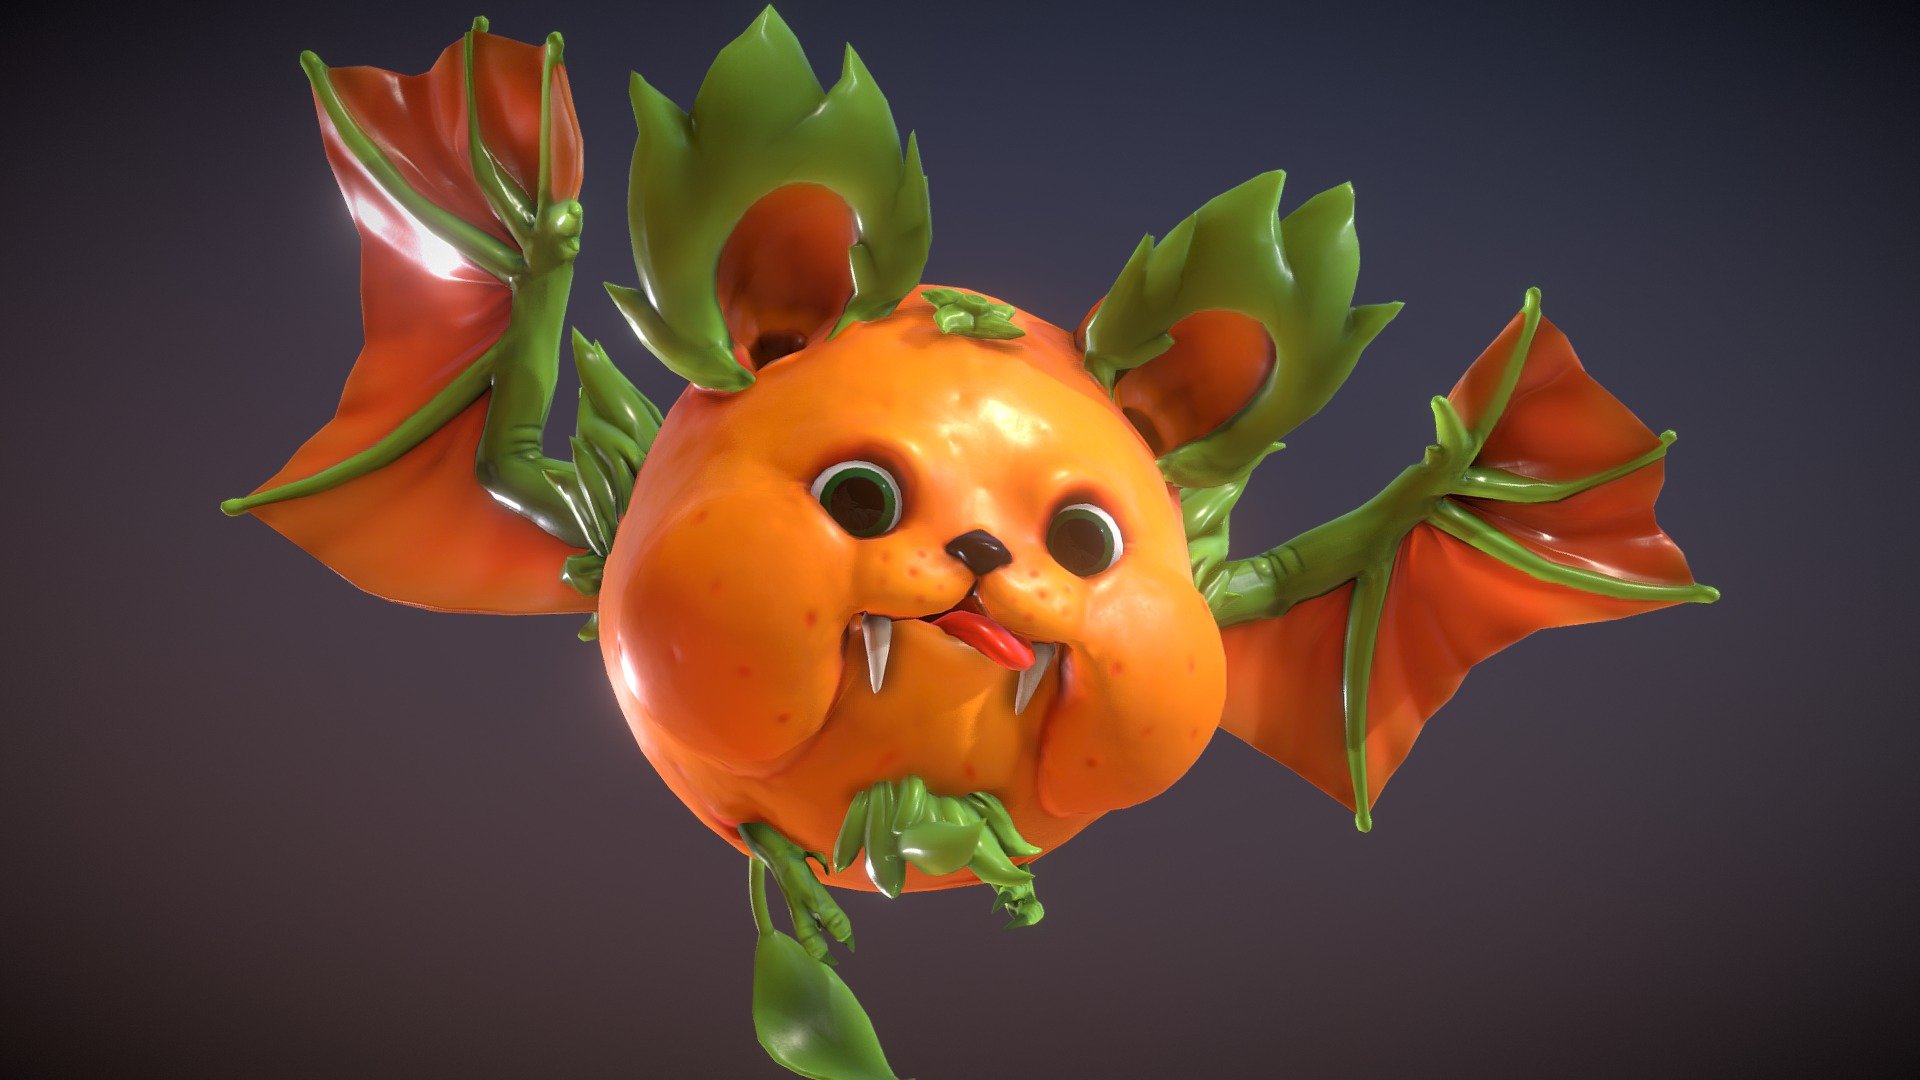 Follow my Artstation for more: https://www.artstation.com/pasco295

One of the early enemies in a project im making.  Try's to hide in piles of fruit or hang from orange trees until provoked.

If anyways want to see more/wips follow my Twitter: https://twitter.com/Pasco295/status/990573209903878145 - Orange Fruit Bat - Animated - 3D model by pasco295 3d model